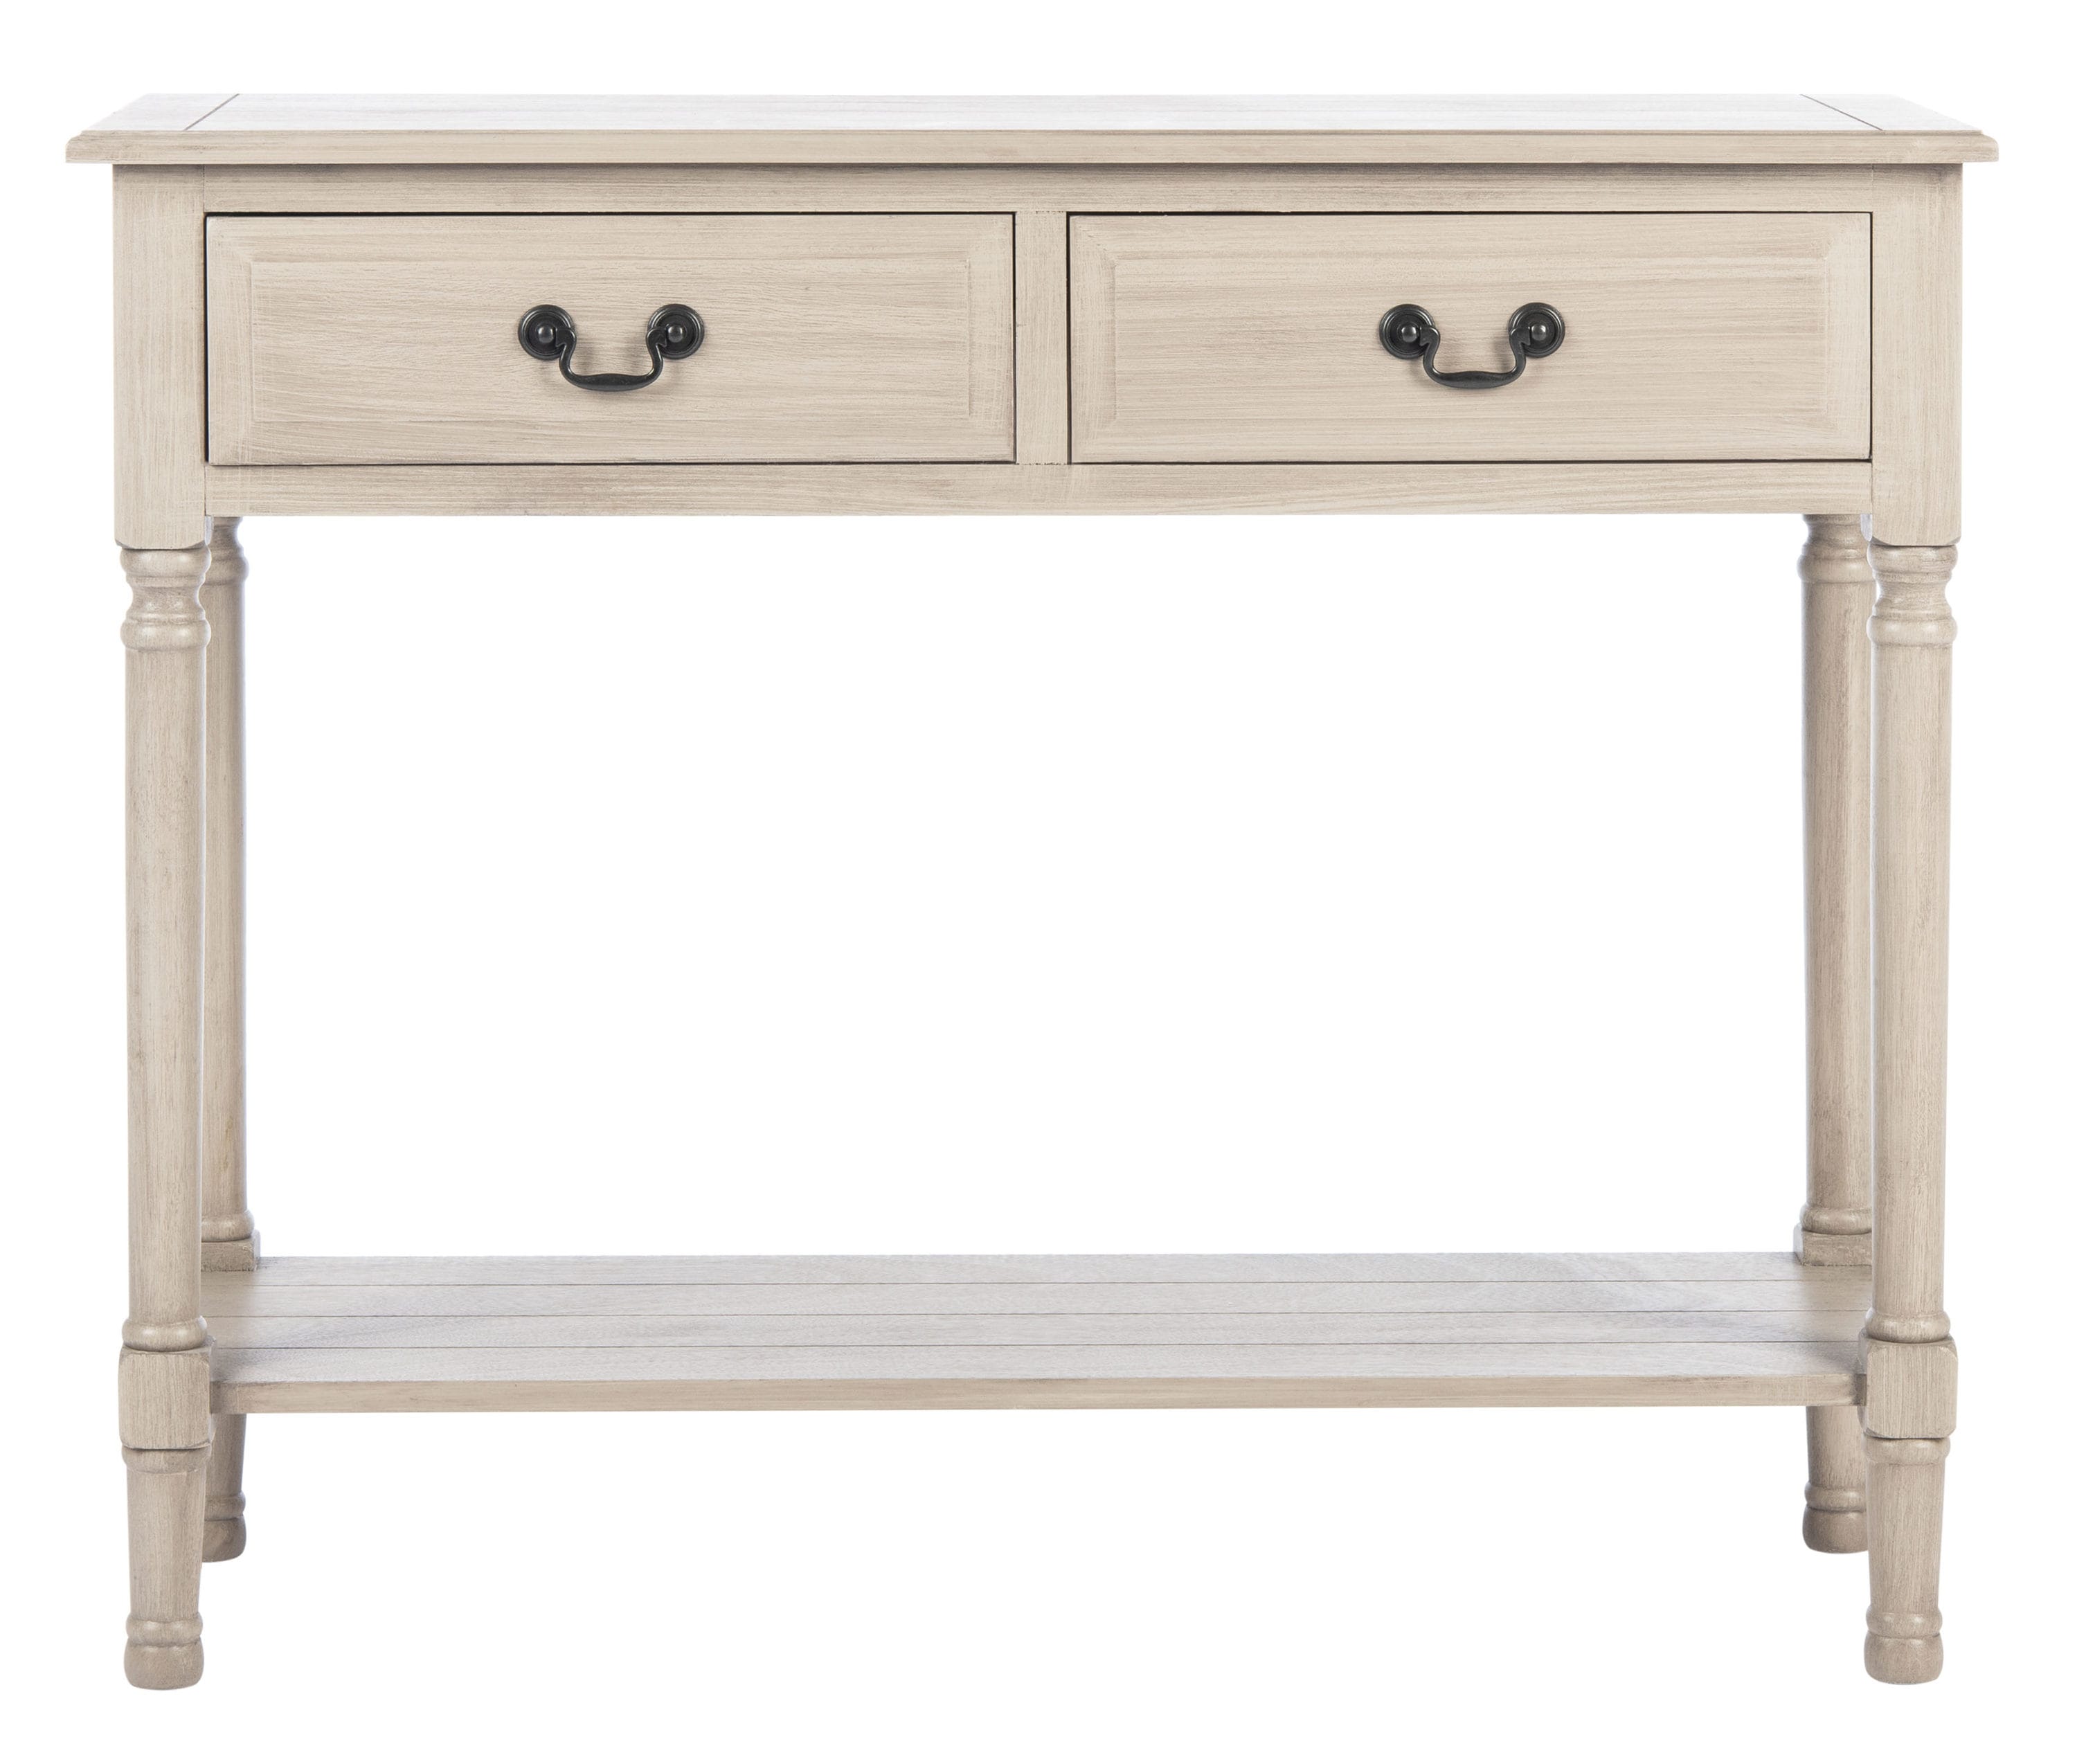 Heritage Winter Melody Console Table,Mdf/Chinese Oak,Washed Oak Big Living 